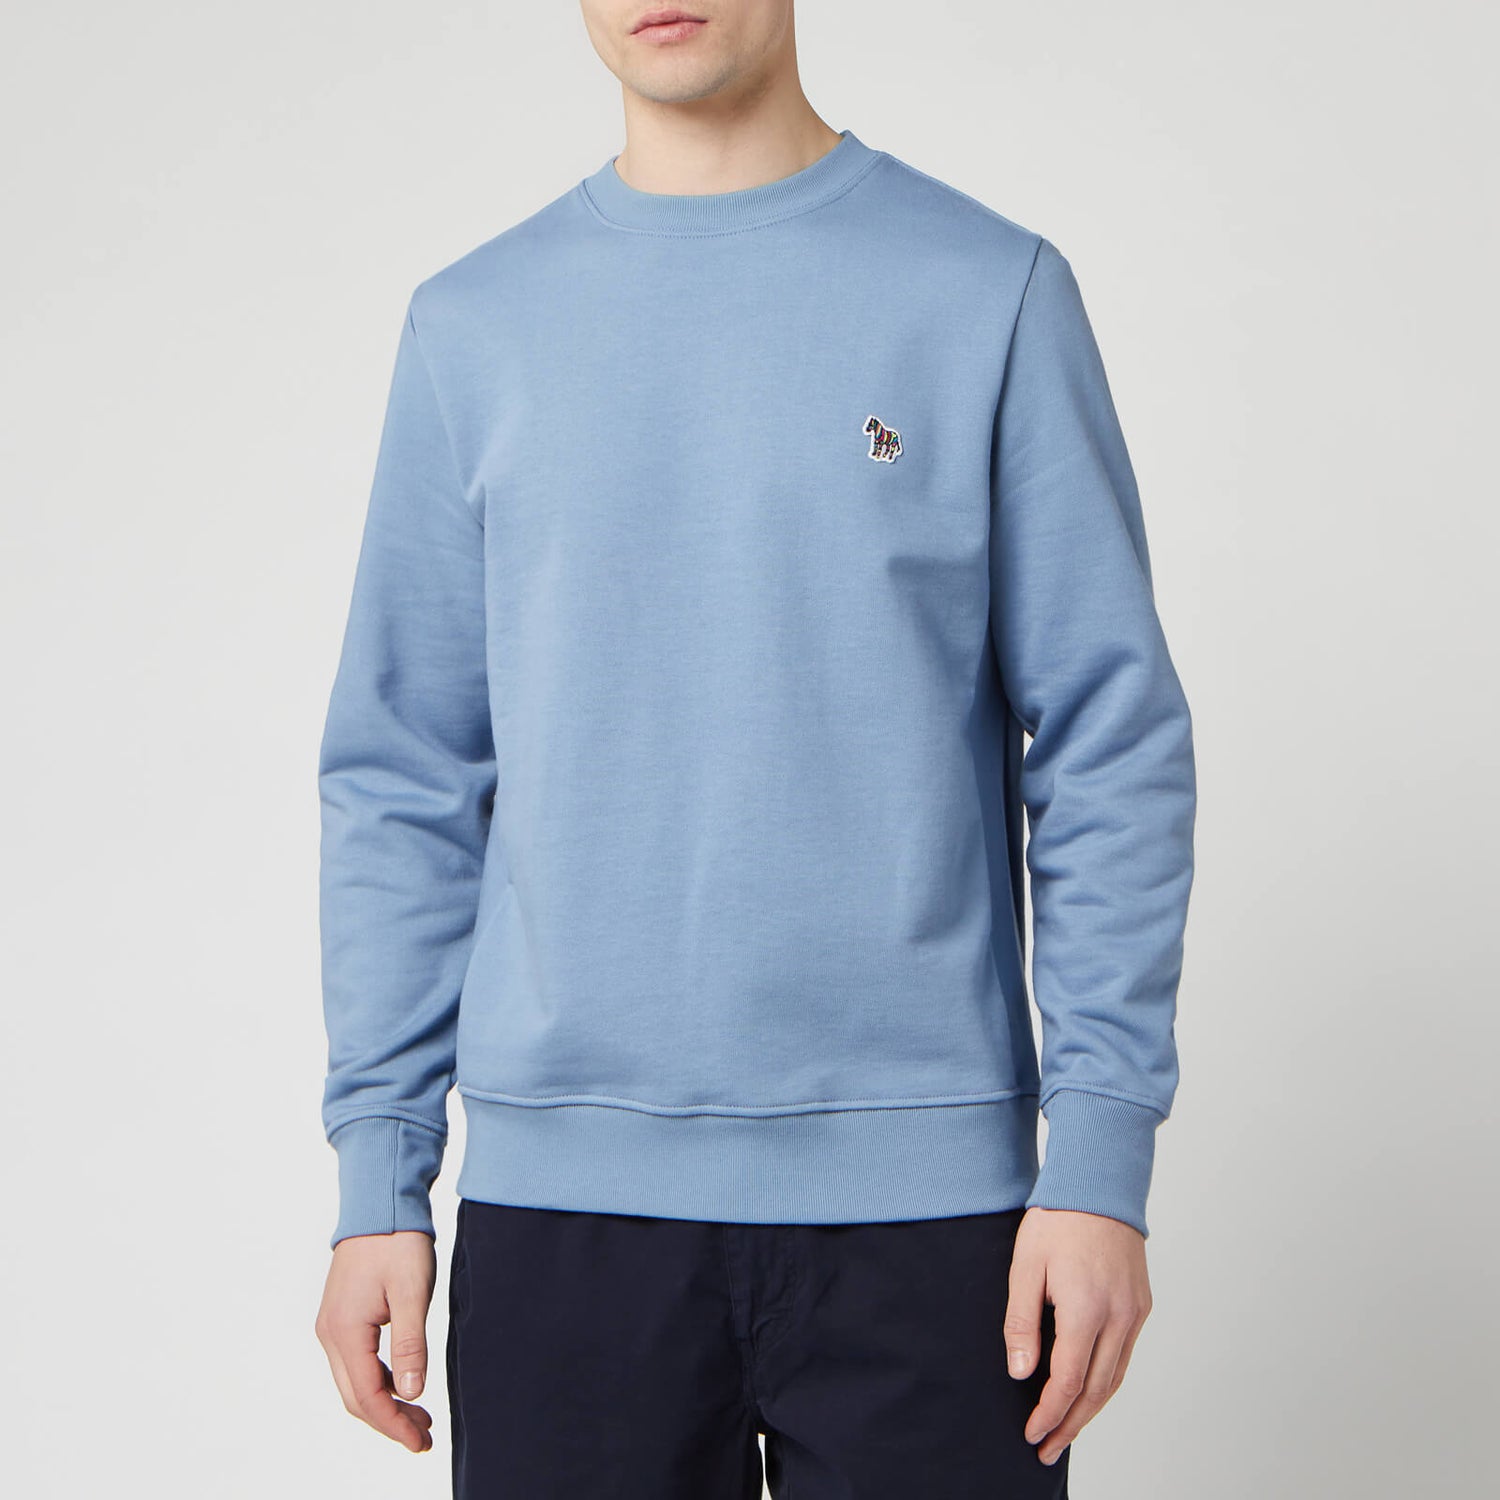 PS Paul Smith Men's Sweatshirt - Grey Blue - Free UK Delivery Available